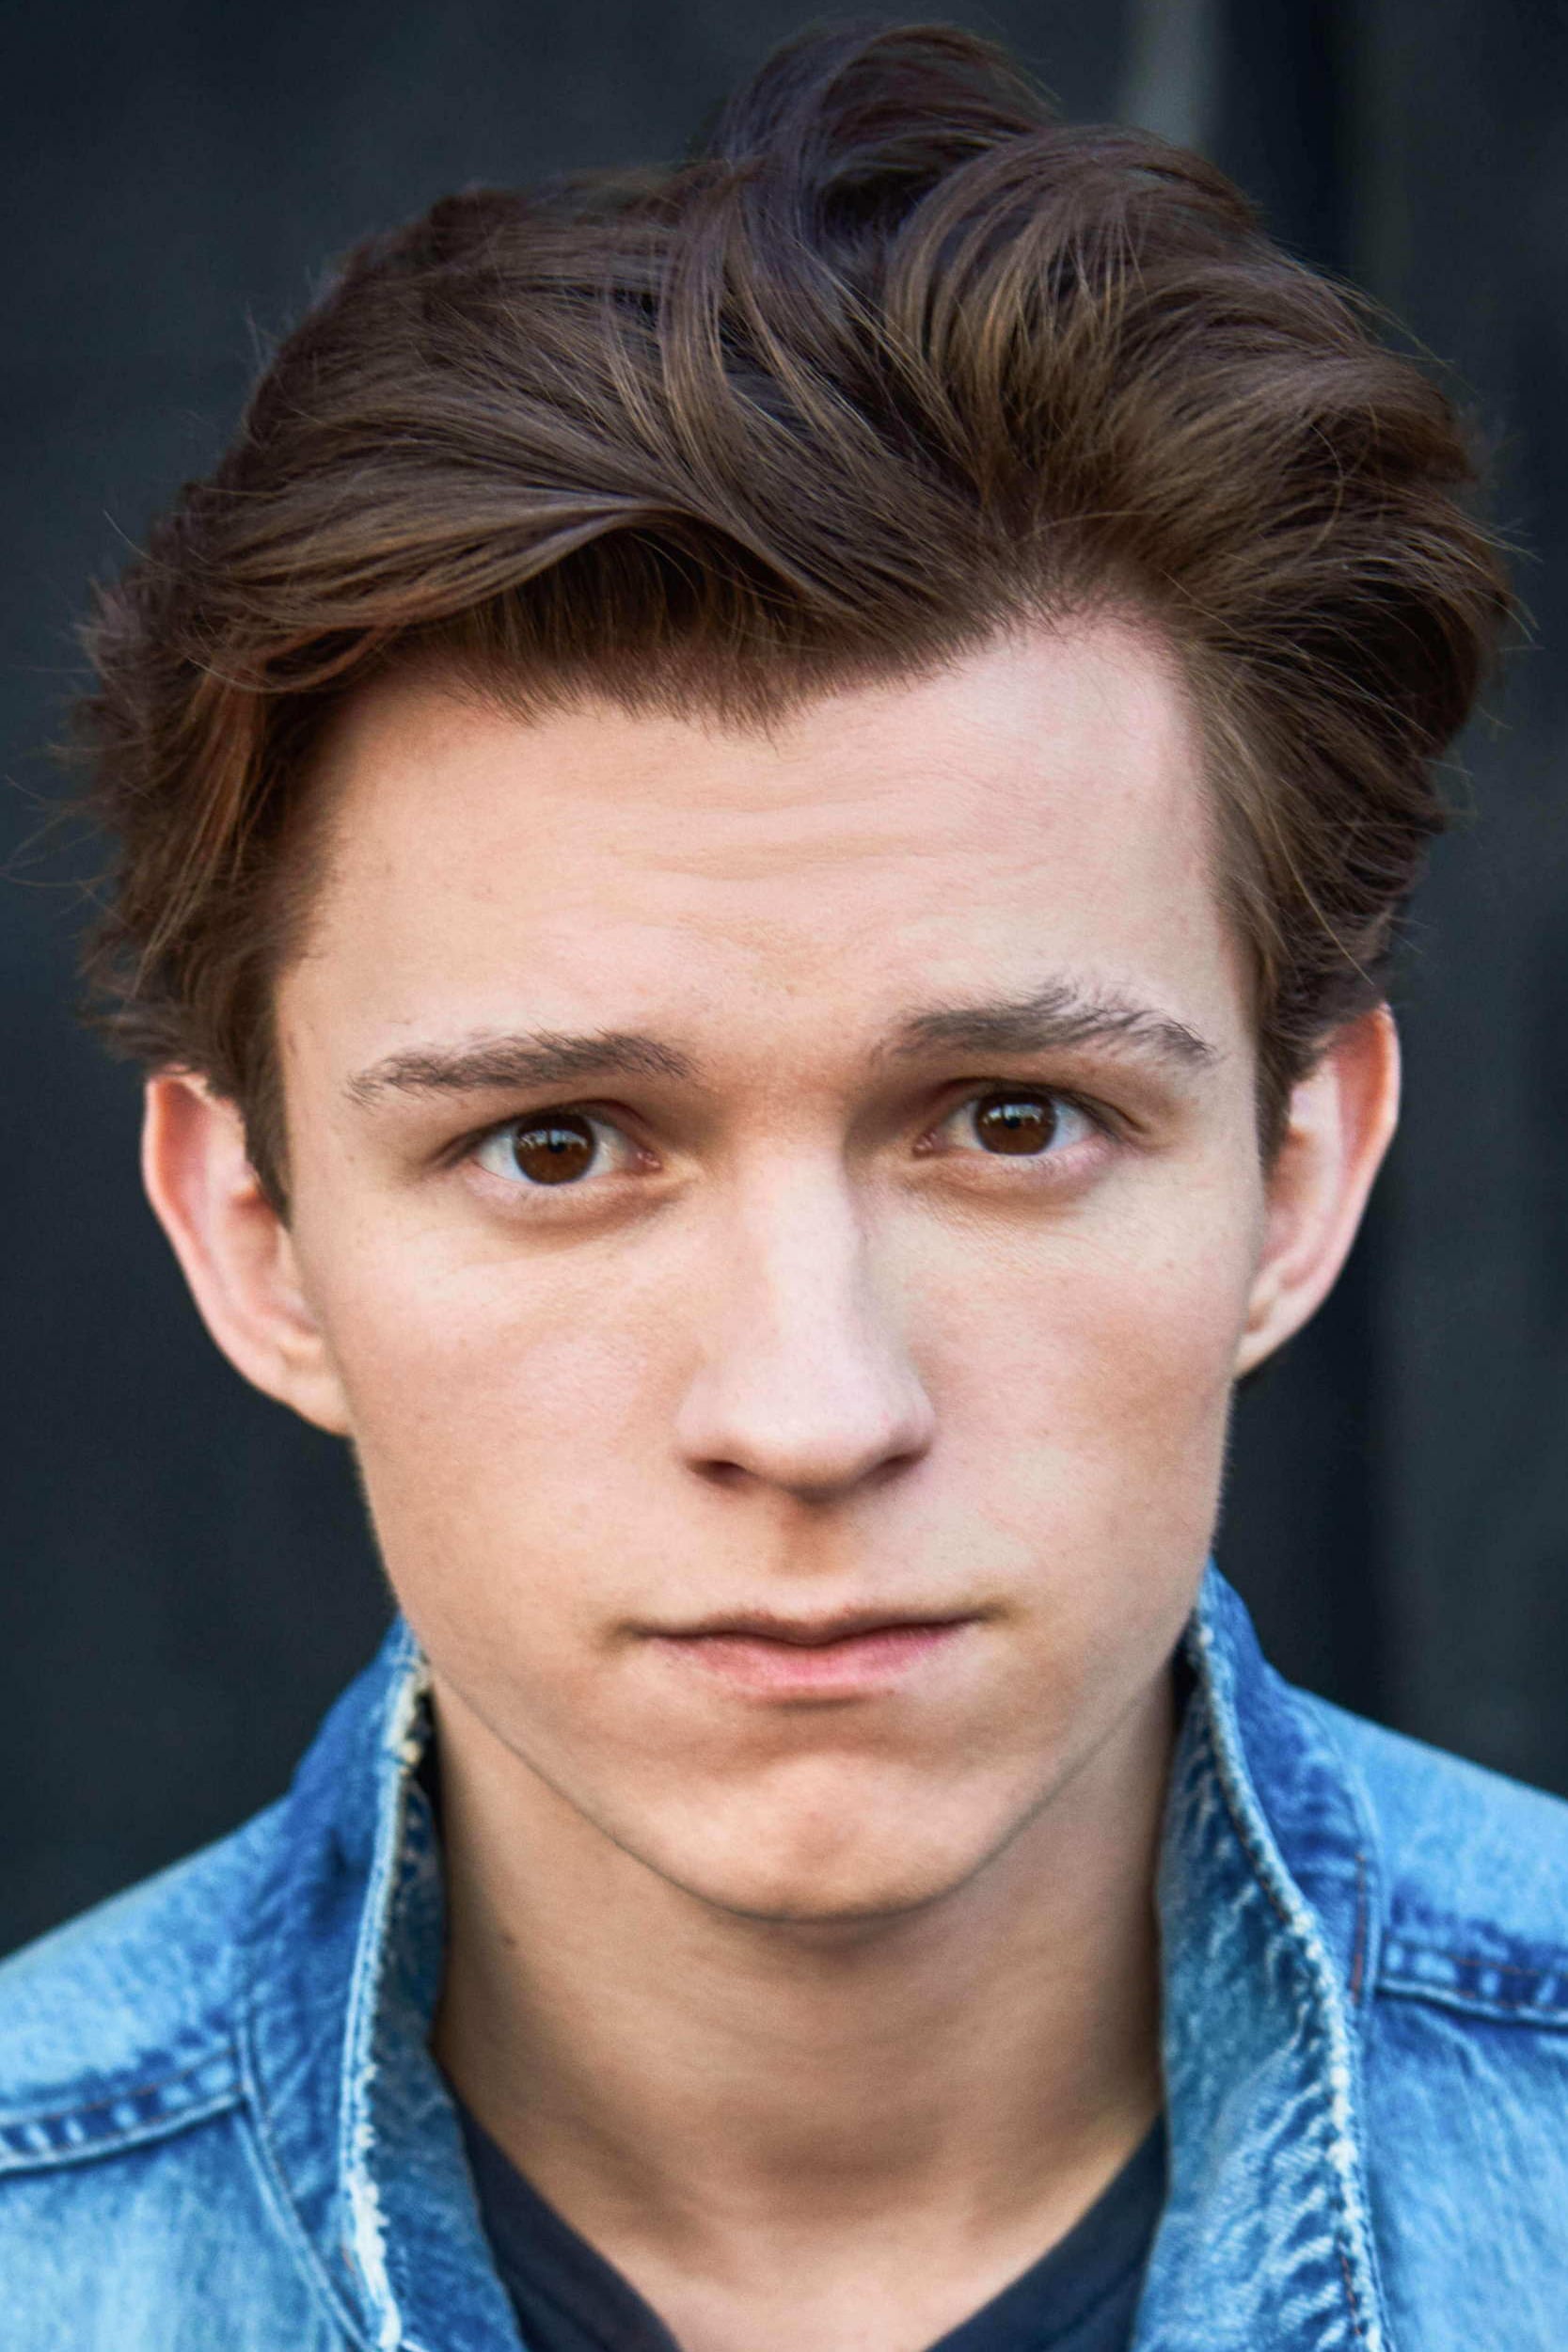 Tom Holland Wallpapers High Quality | Download Free